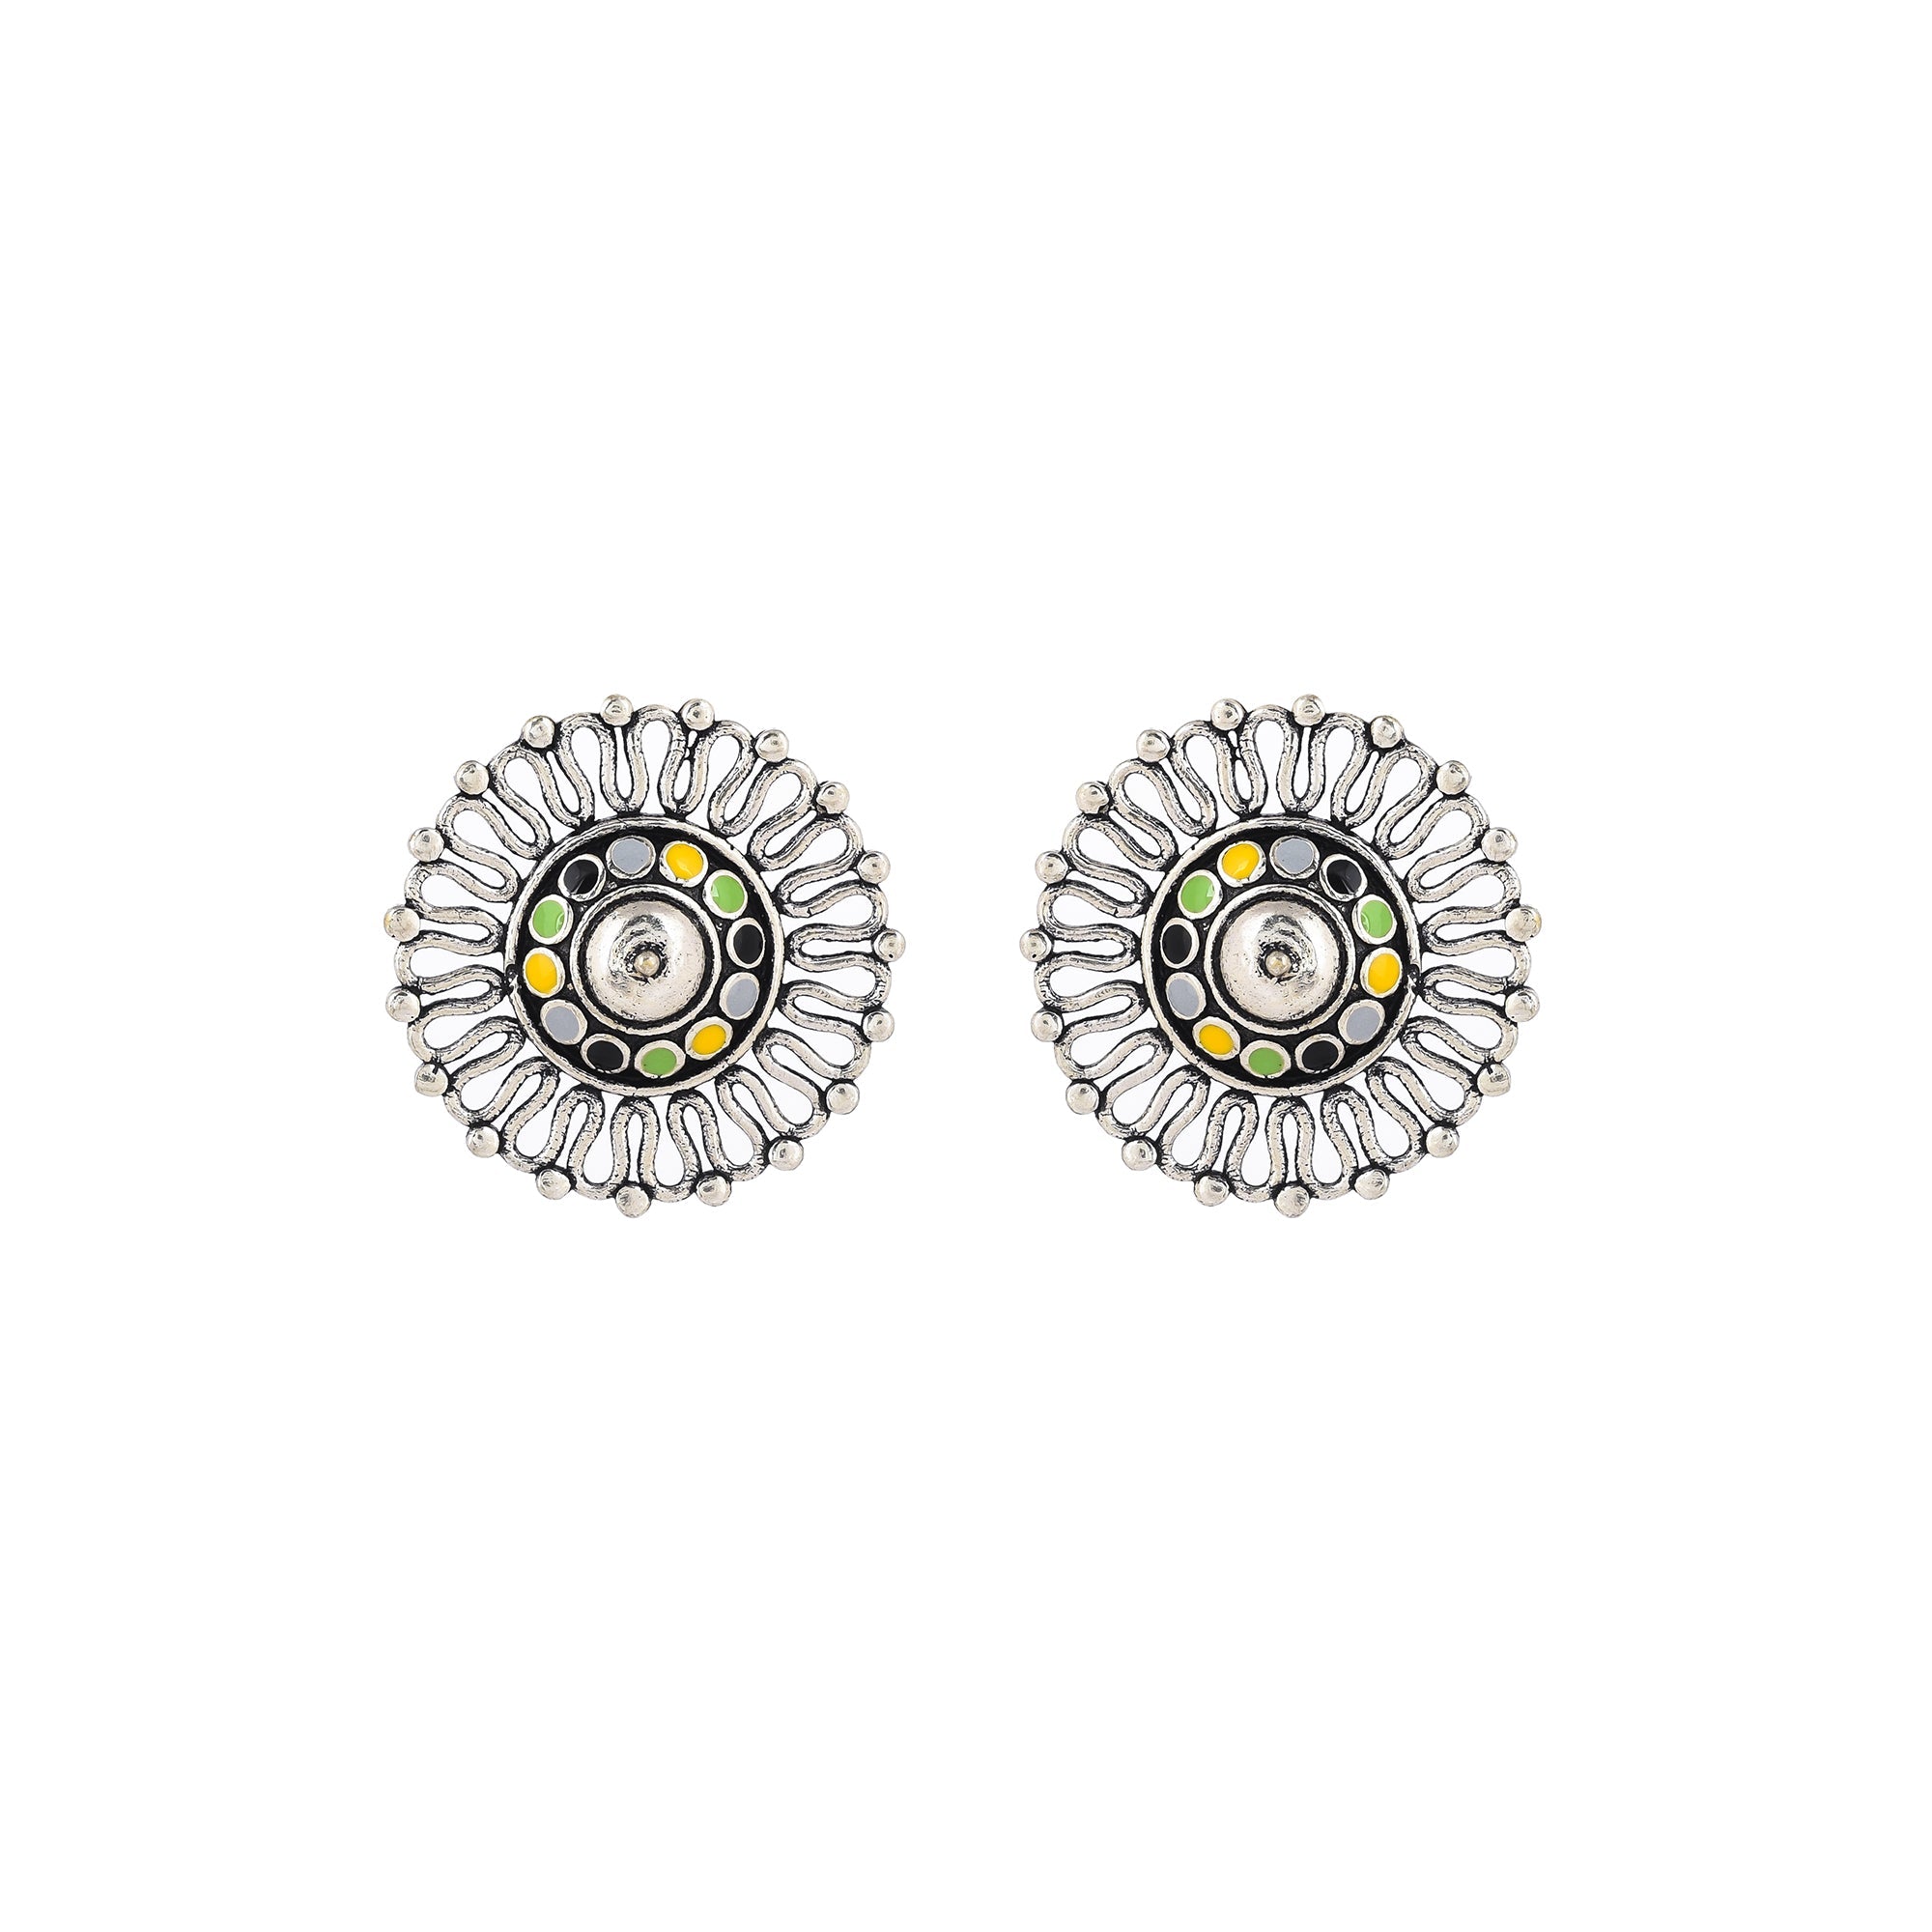 Women's Folklore Silver Plated Round Cutwork Stud Earrings - Voylla